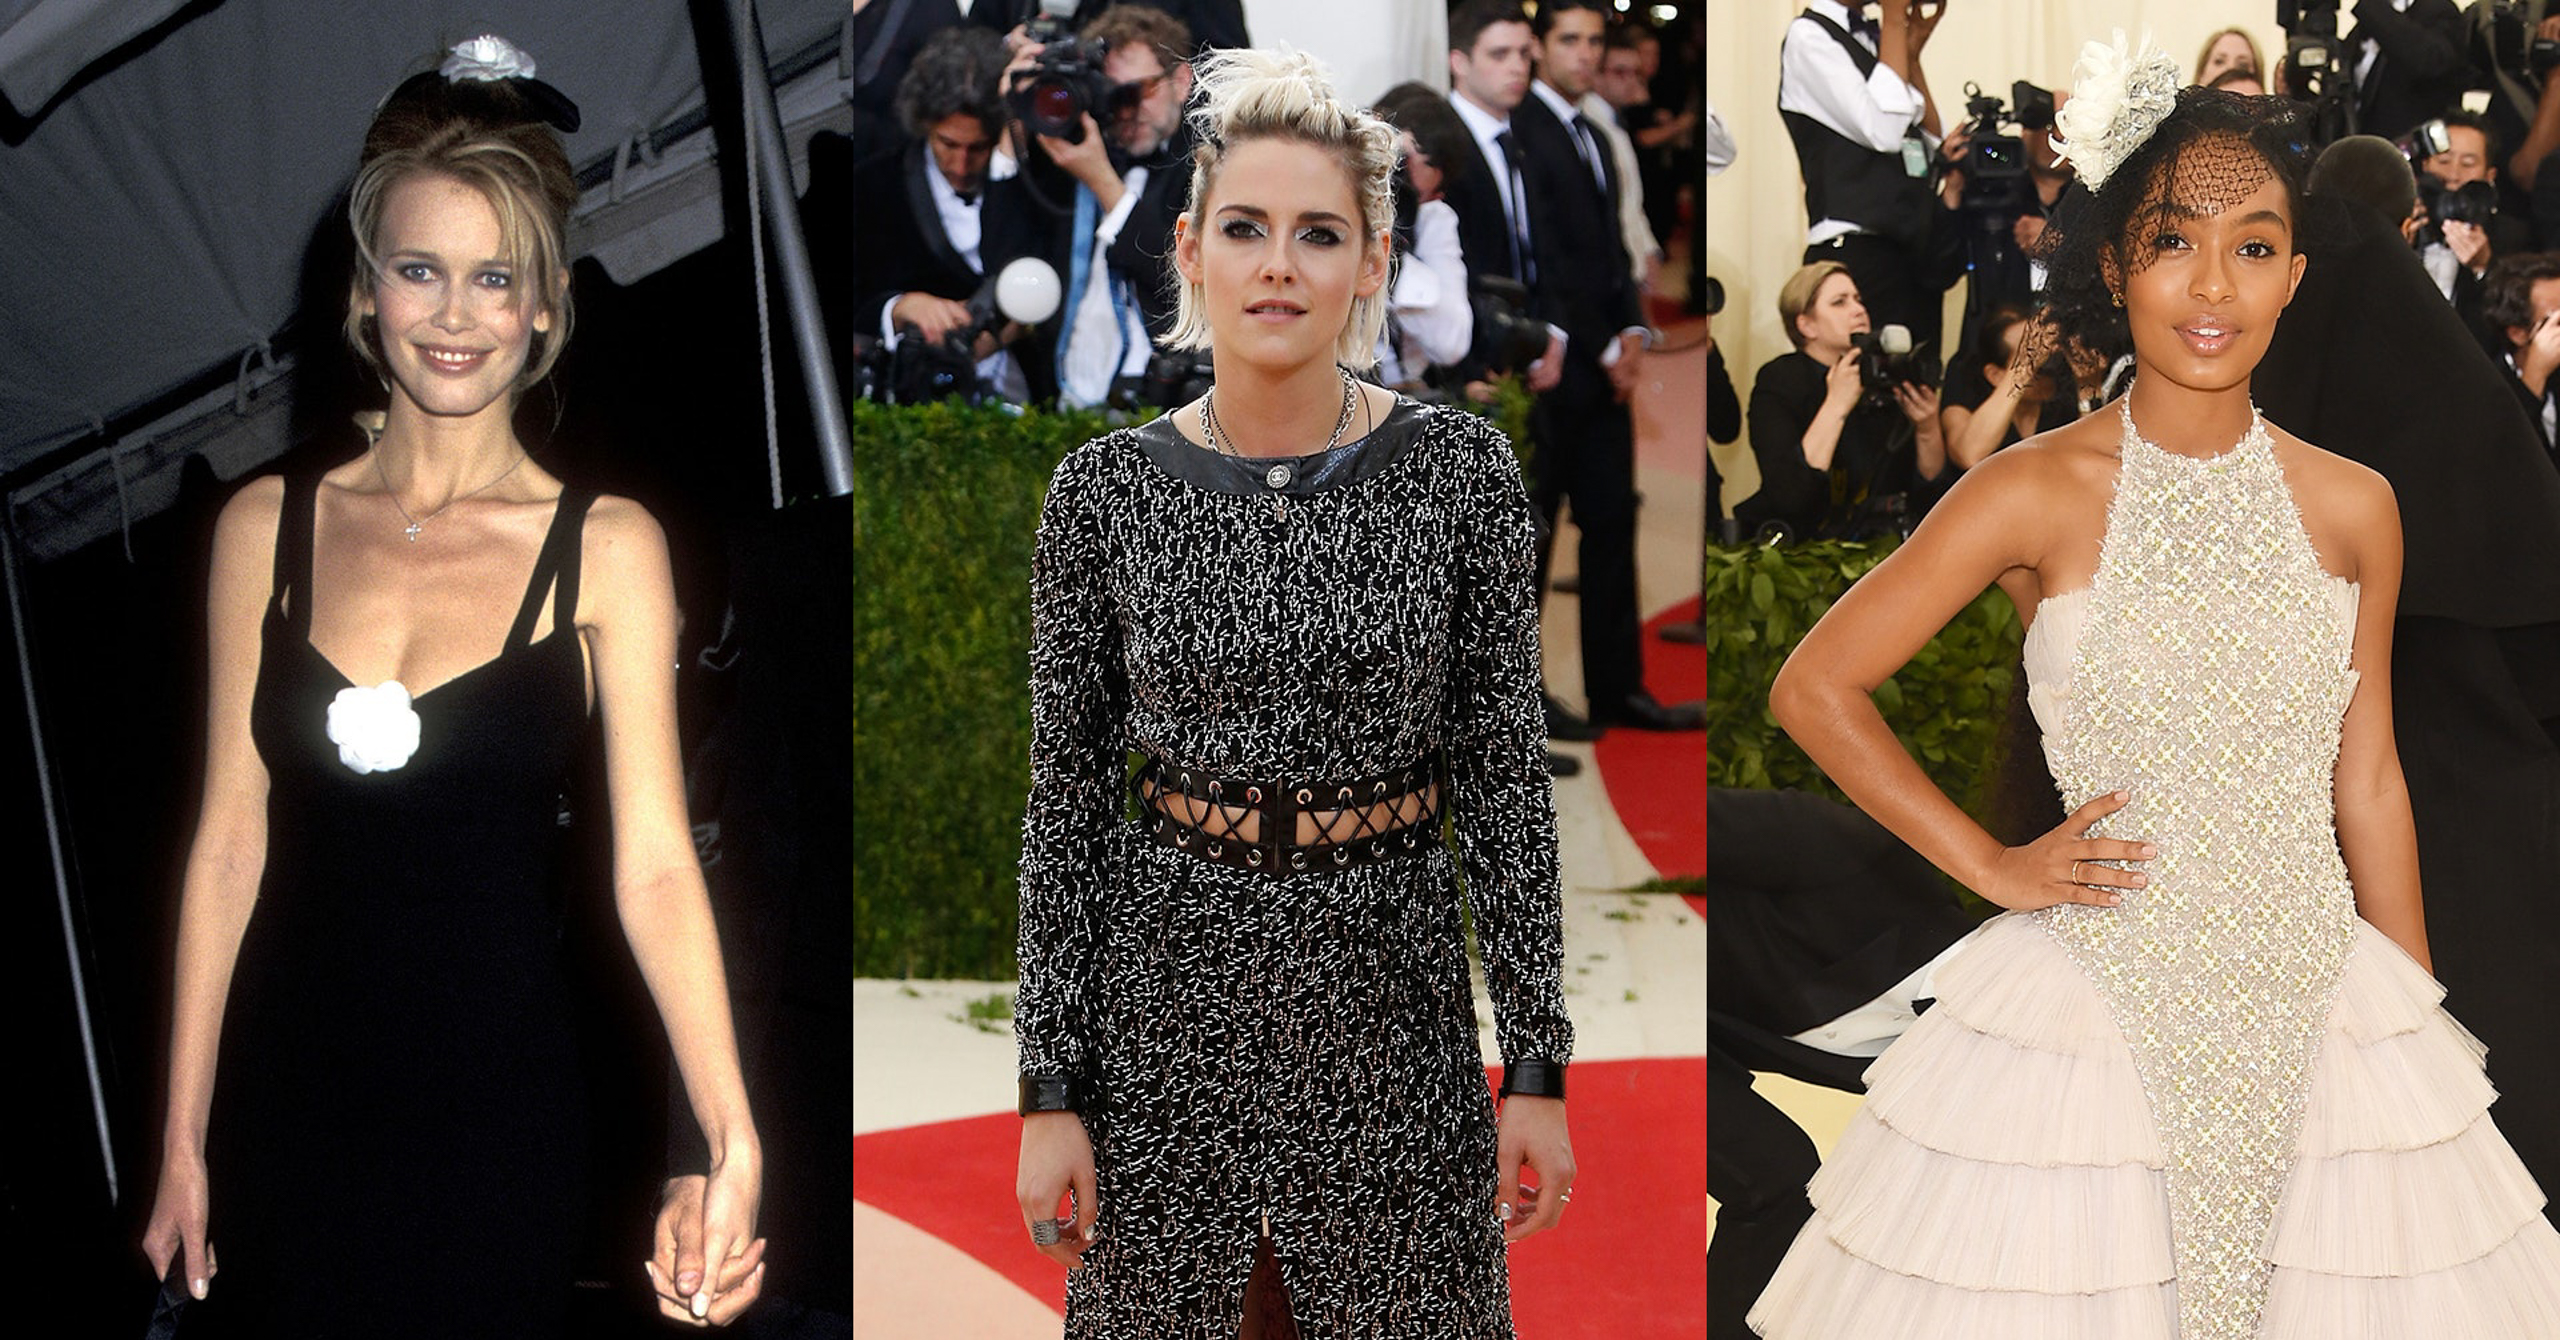 The Best Karl Lagerfeld For Chanel Looks At The Met Gala Through The ...